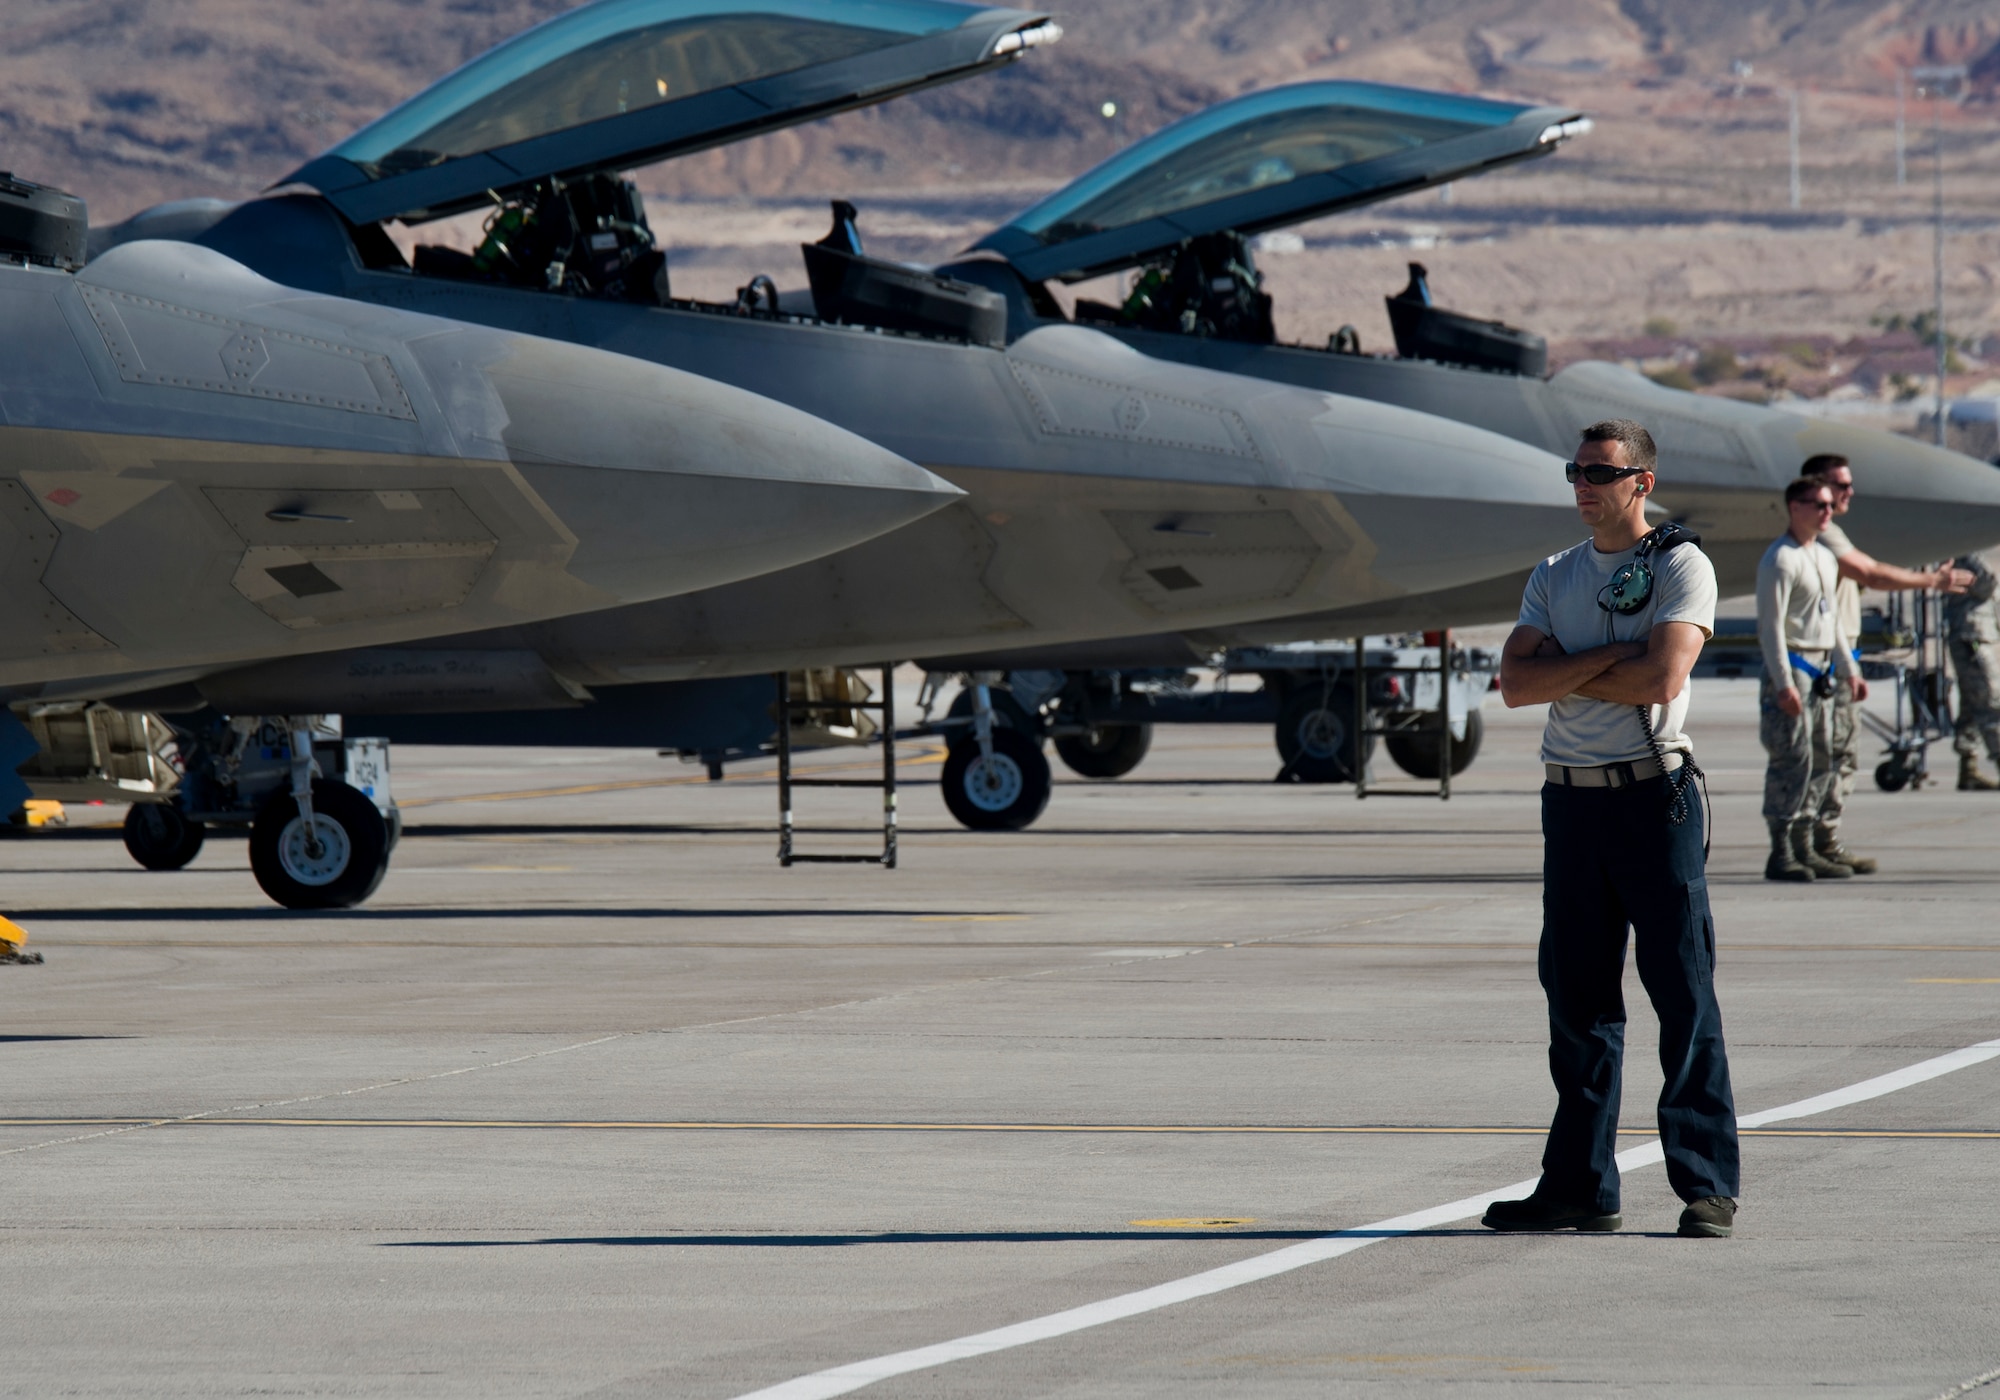 Staff Sgt. Robert Mackle, 95th Aircraft Maintenance Unit crew chief from Tyndall AFB, Fla., waits on the F-22 Raptor pilots to arrive during Red Flag 16-1, Jan. 28, 2016 at Nellis AFB, Nev. Hundreds of maintainers from around the world ensure the mission is executed safely and efficiently during the exercise. (U.S. Air Force photo by Senior Airman Alex Fox Echols III/Released)